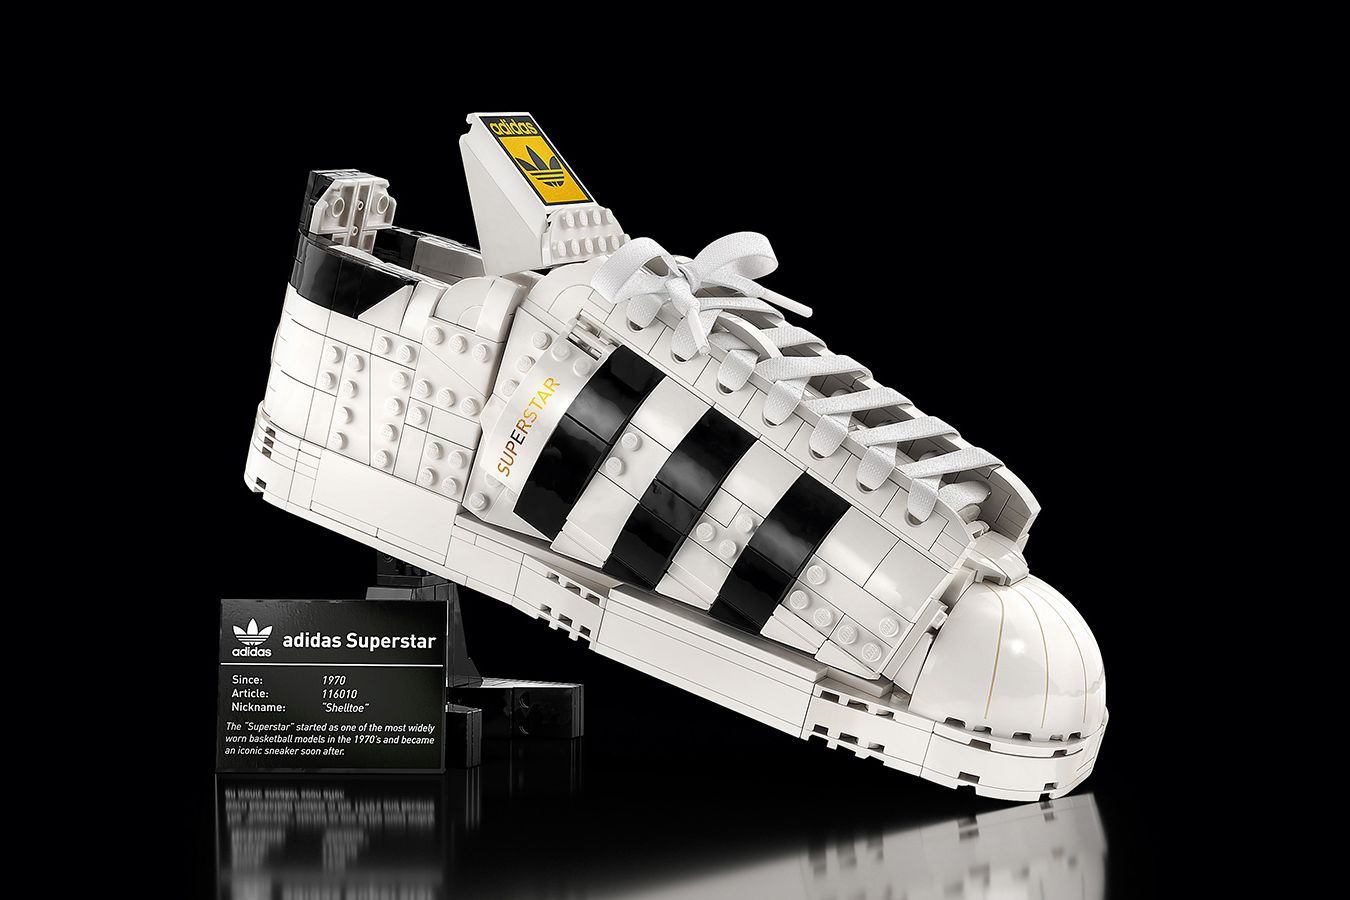 Lego has created an Adidas sneaker, complete with laces and a shoebox CNN